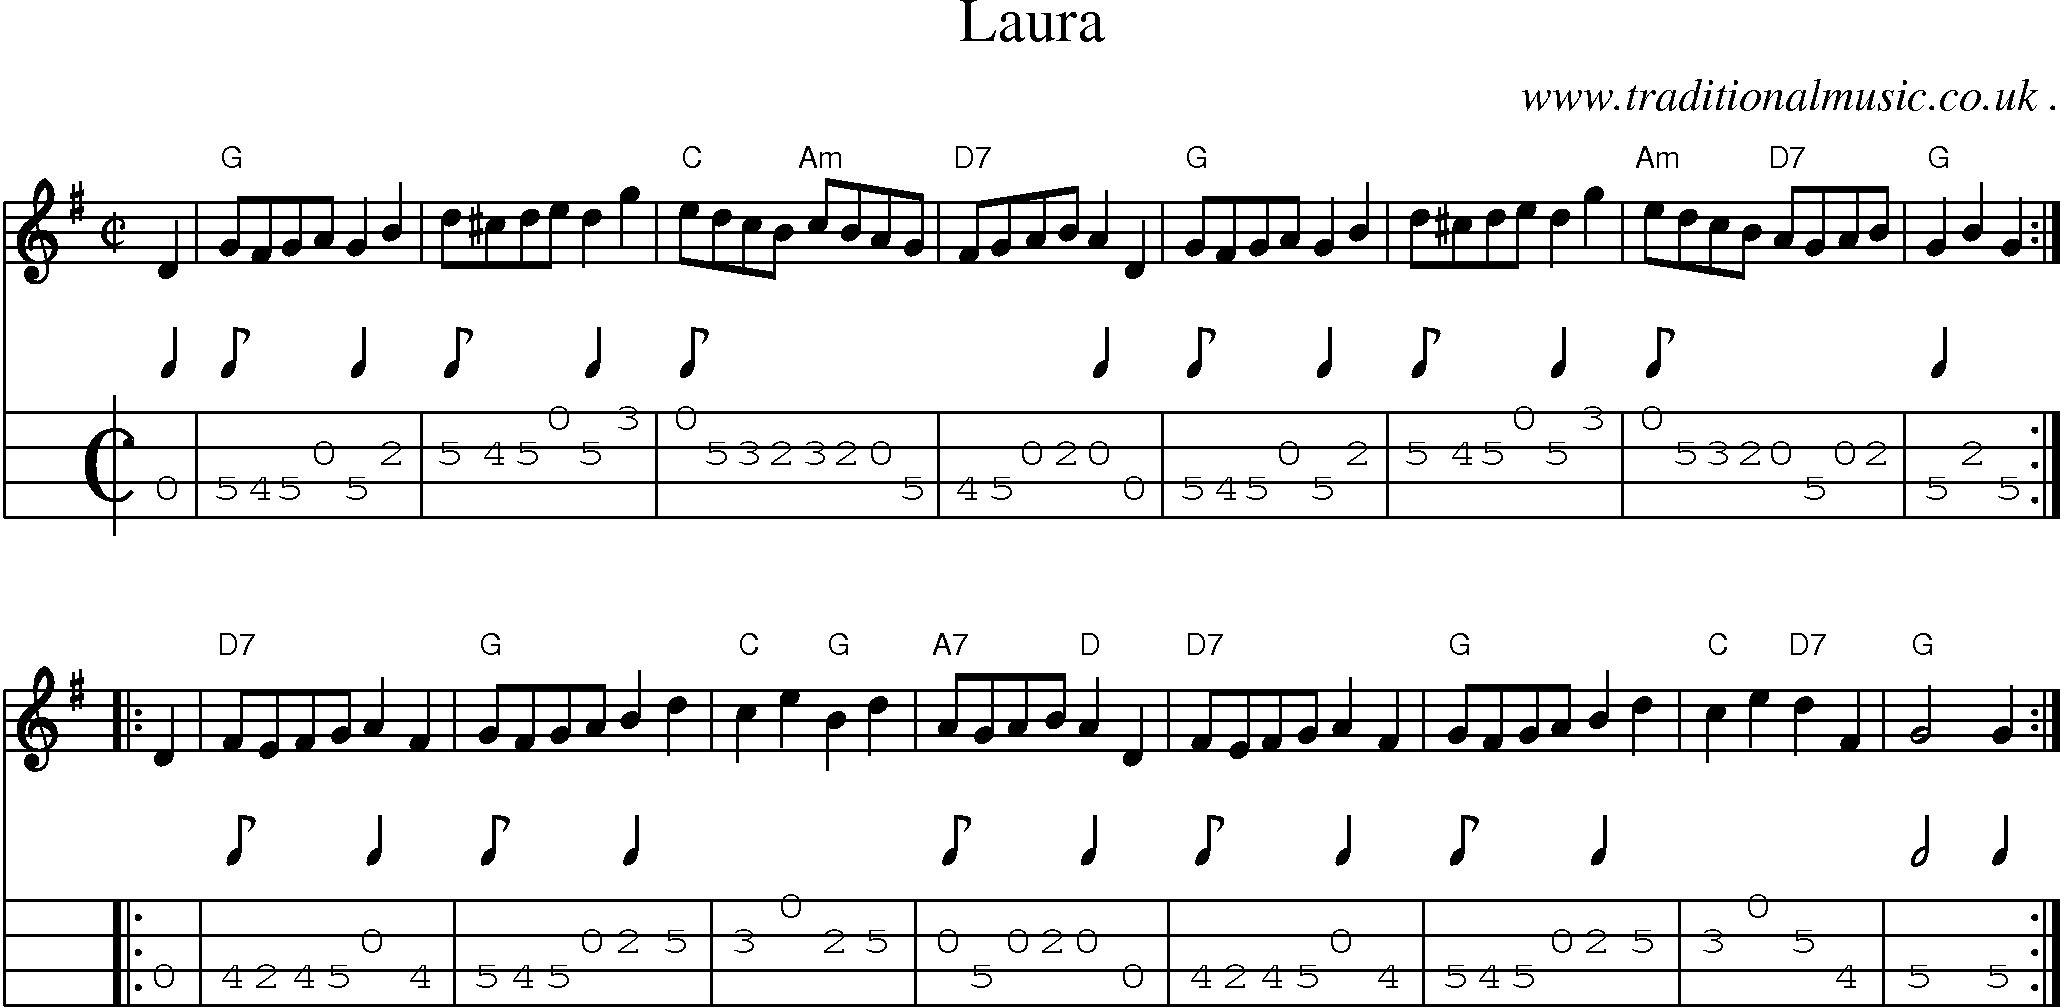 Sheet-music  score, Chords and Mandolin Tabs for Laura